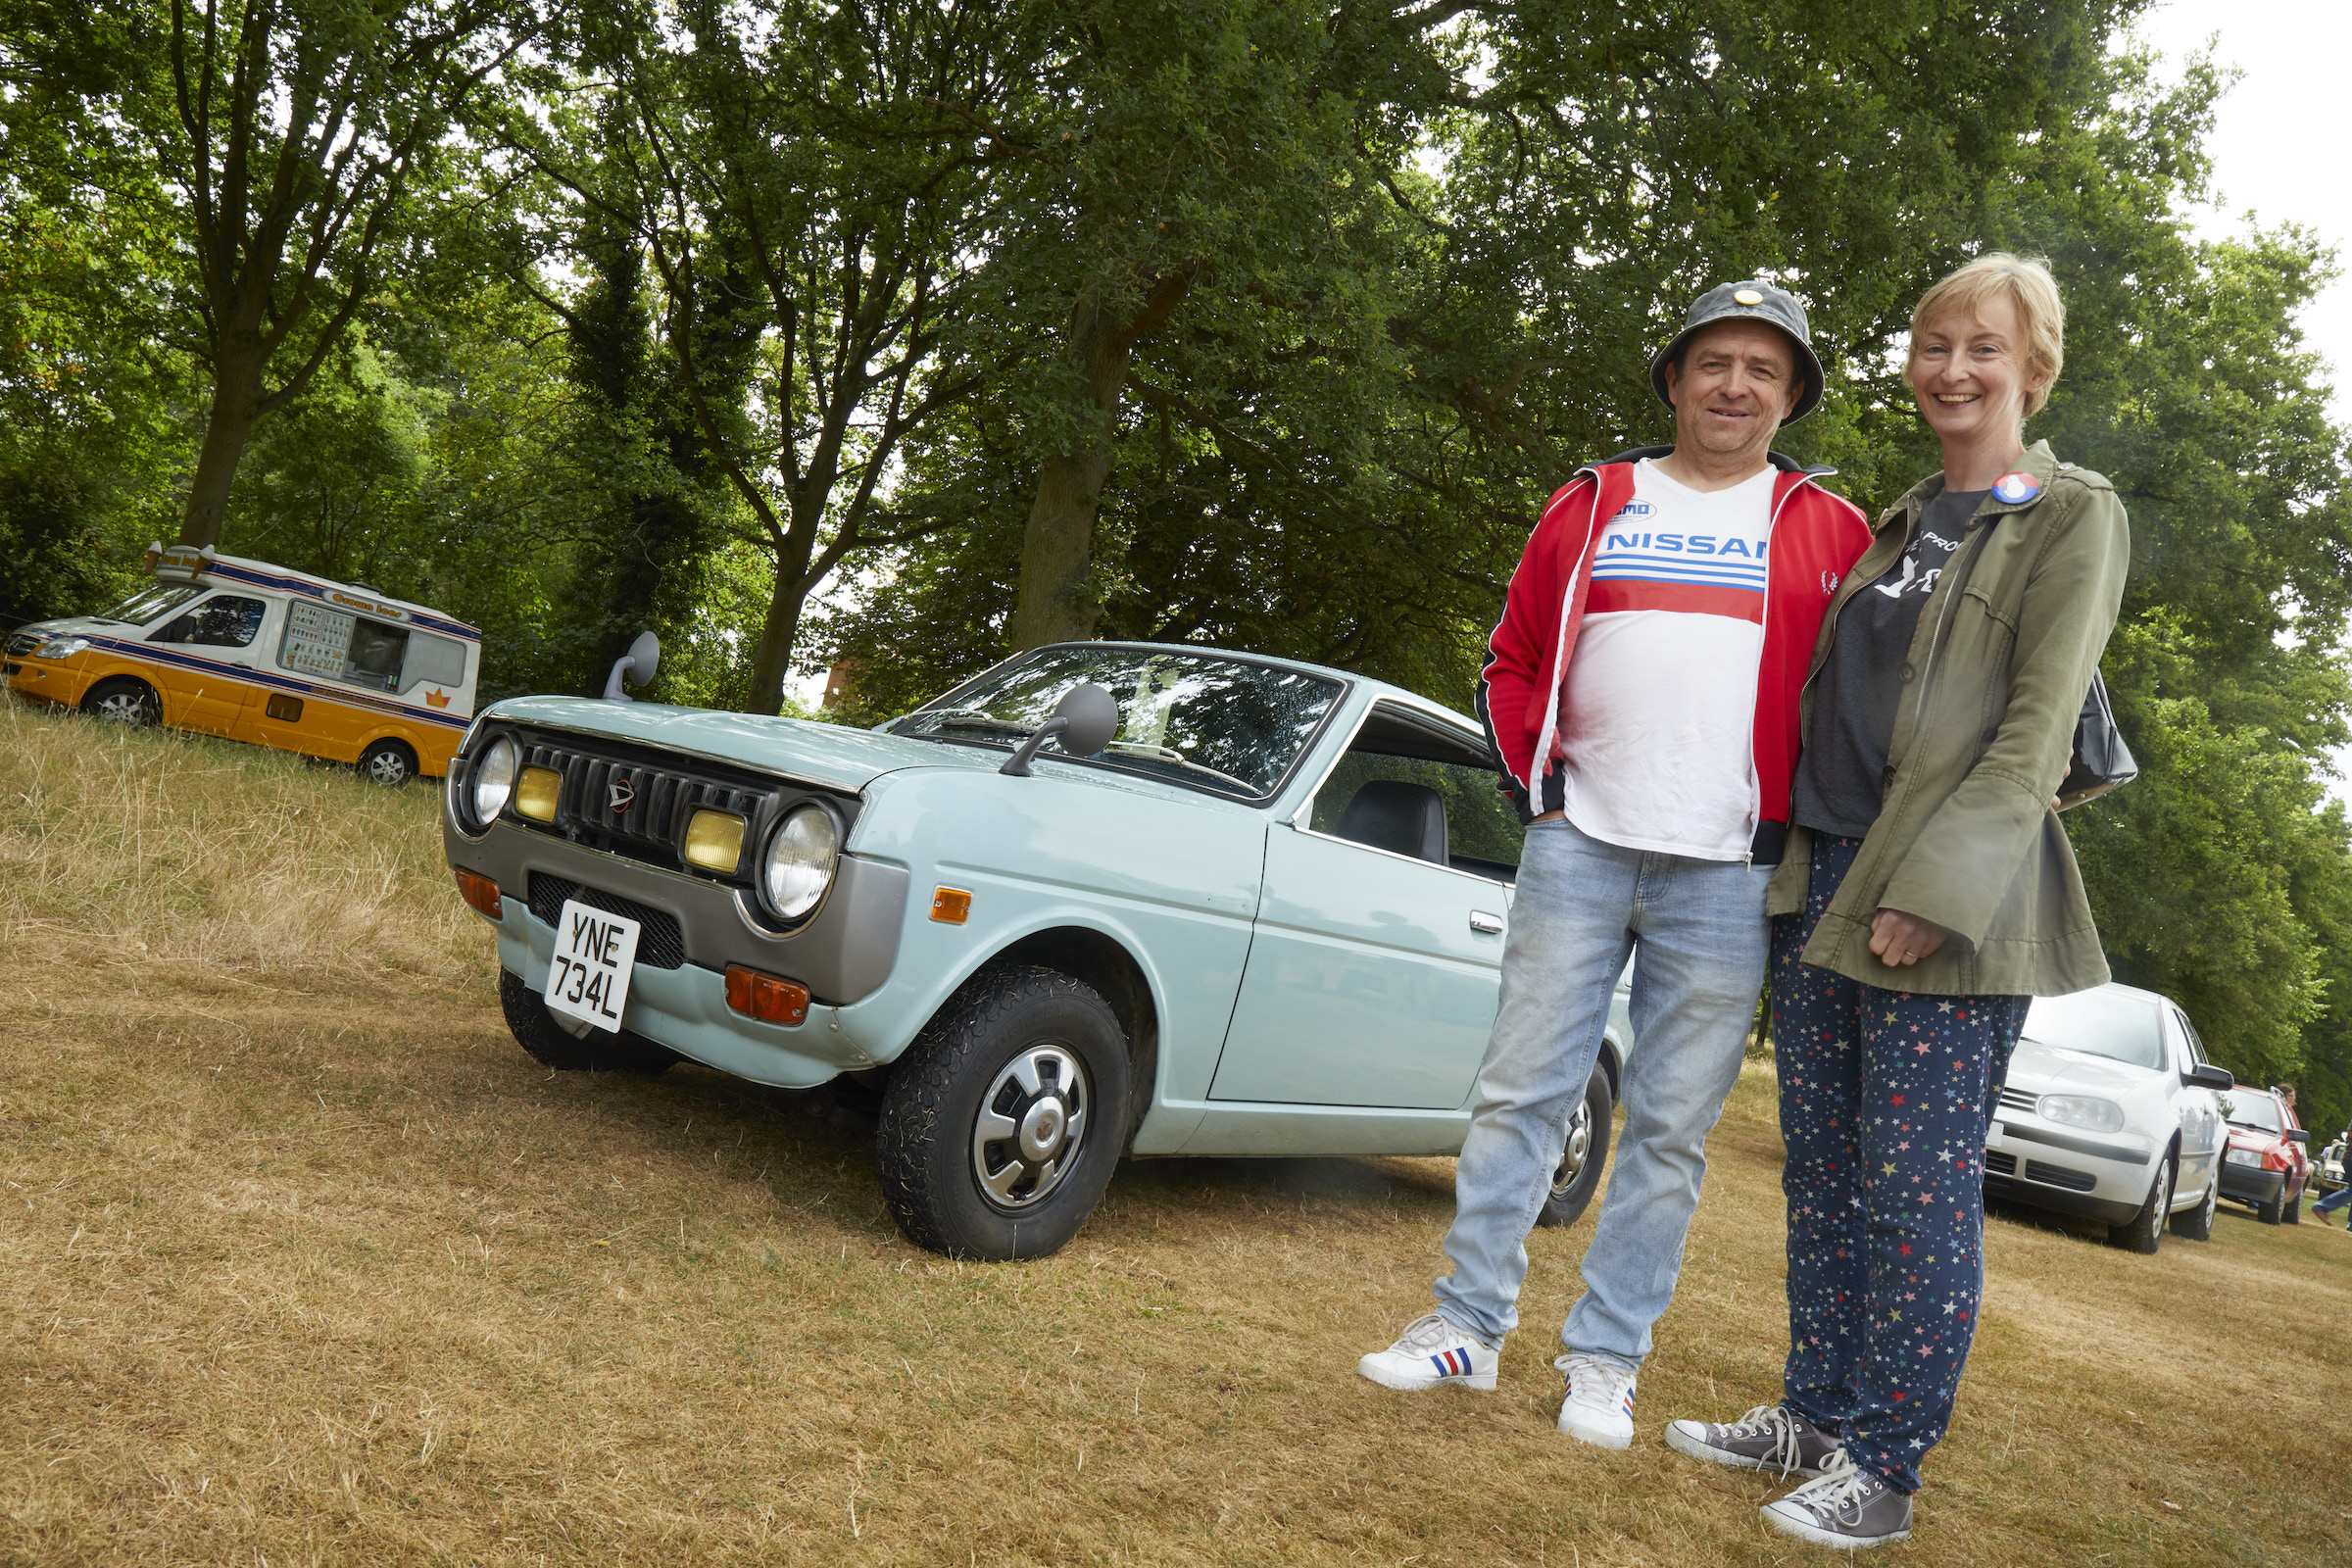 Your Classics: Eddie Rattley’s Daihatsu Fellow Max is a tiny two-stroke